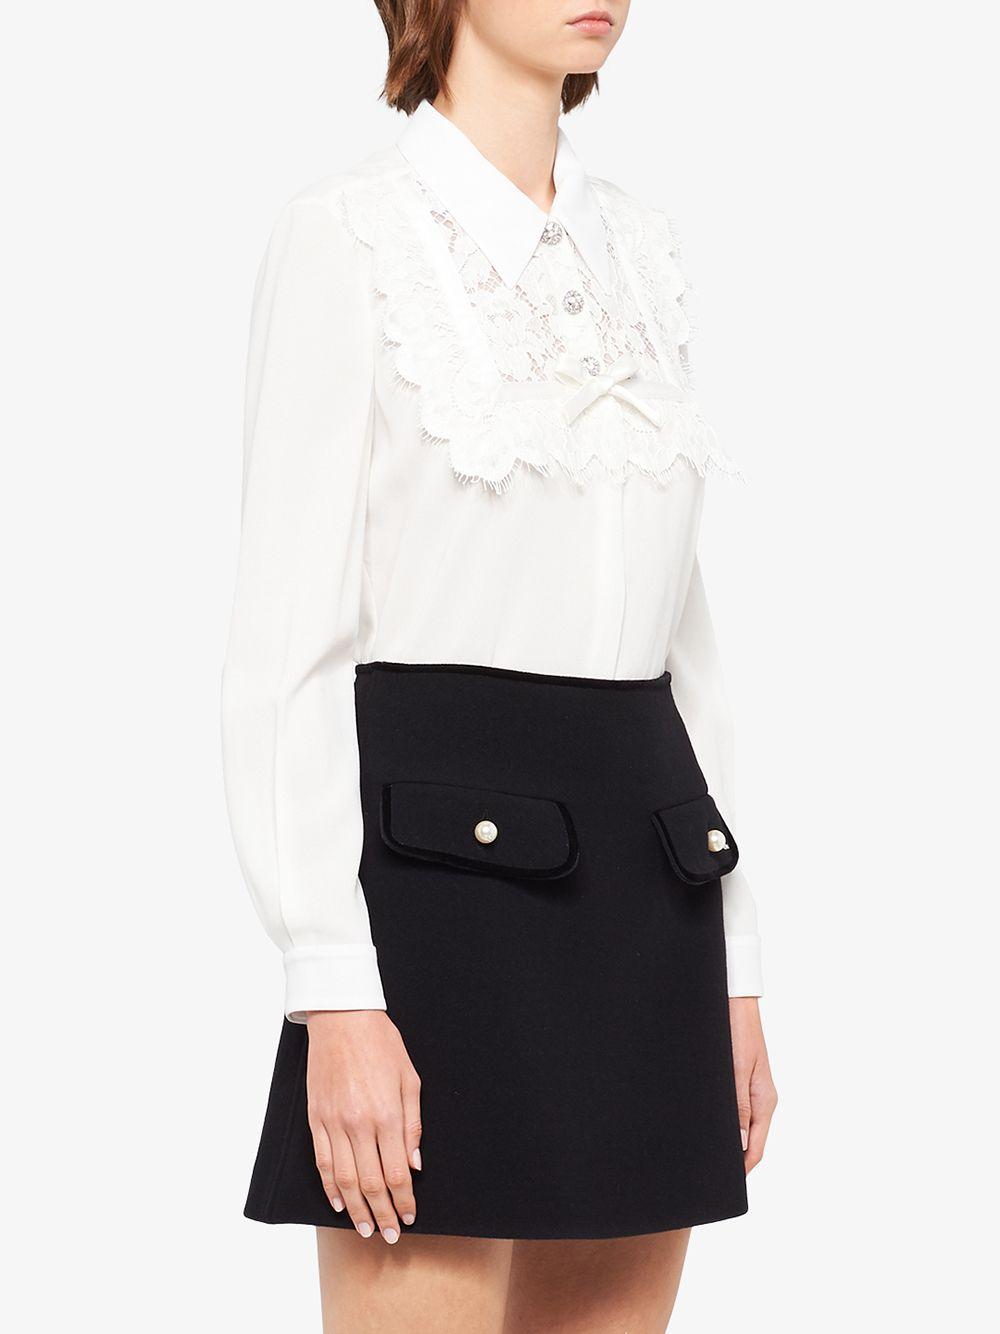 Miu Miu Synthetic Sablé Blouse in White - Lyst